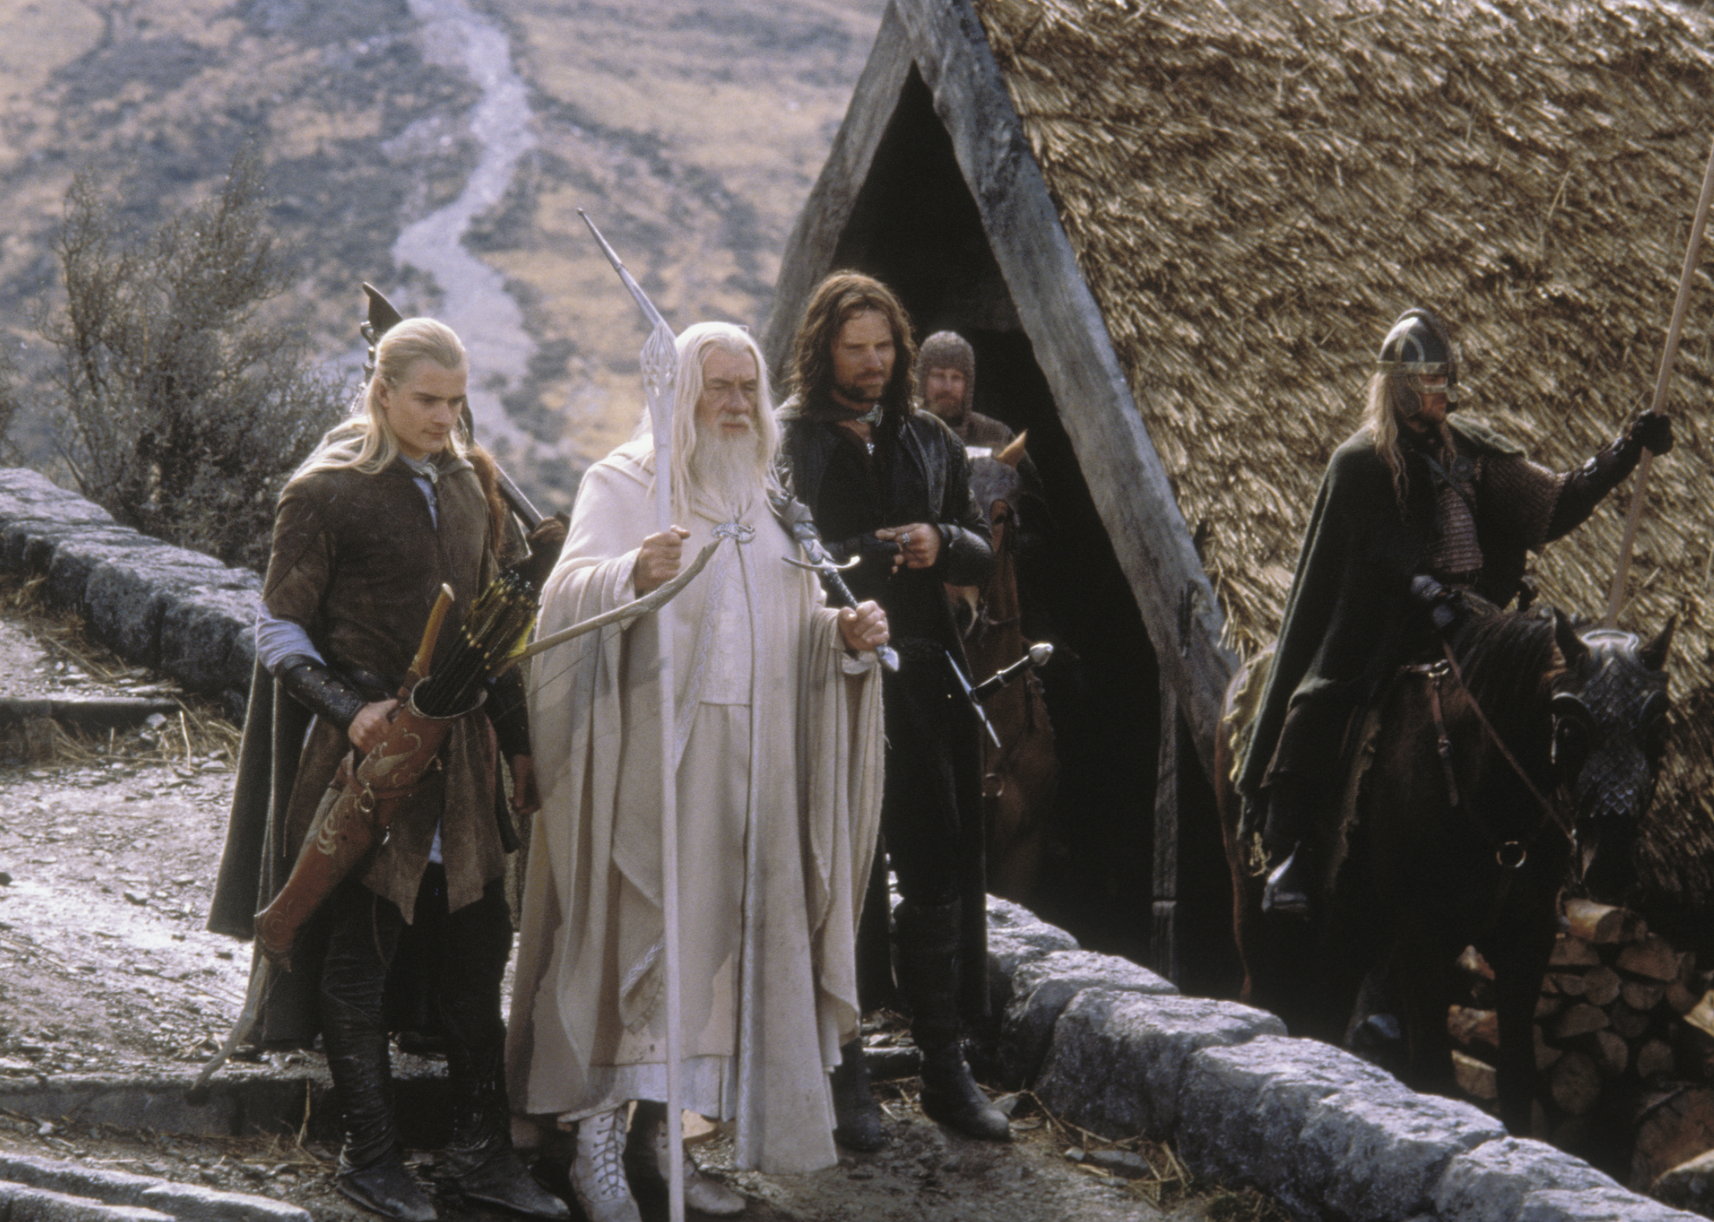 Viggo Mortensen, Ian McKellen, and Orlando Bloom in "The Lord of the Rings: The Return of the King"